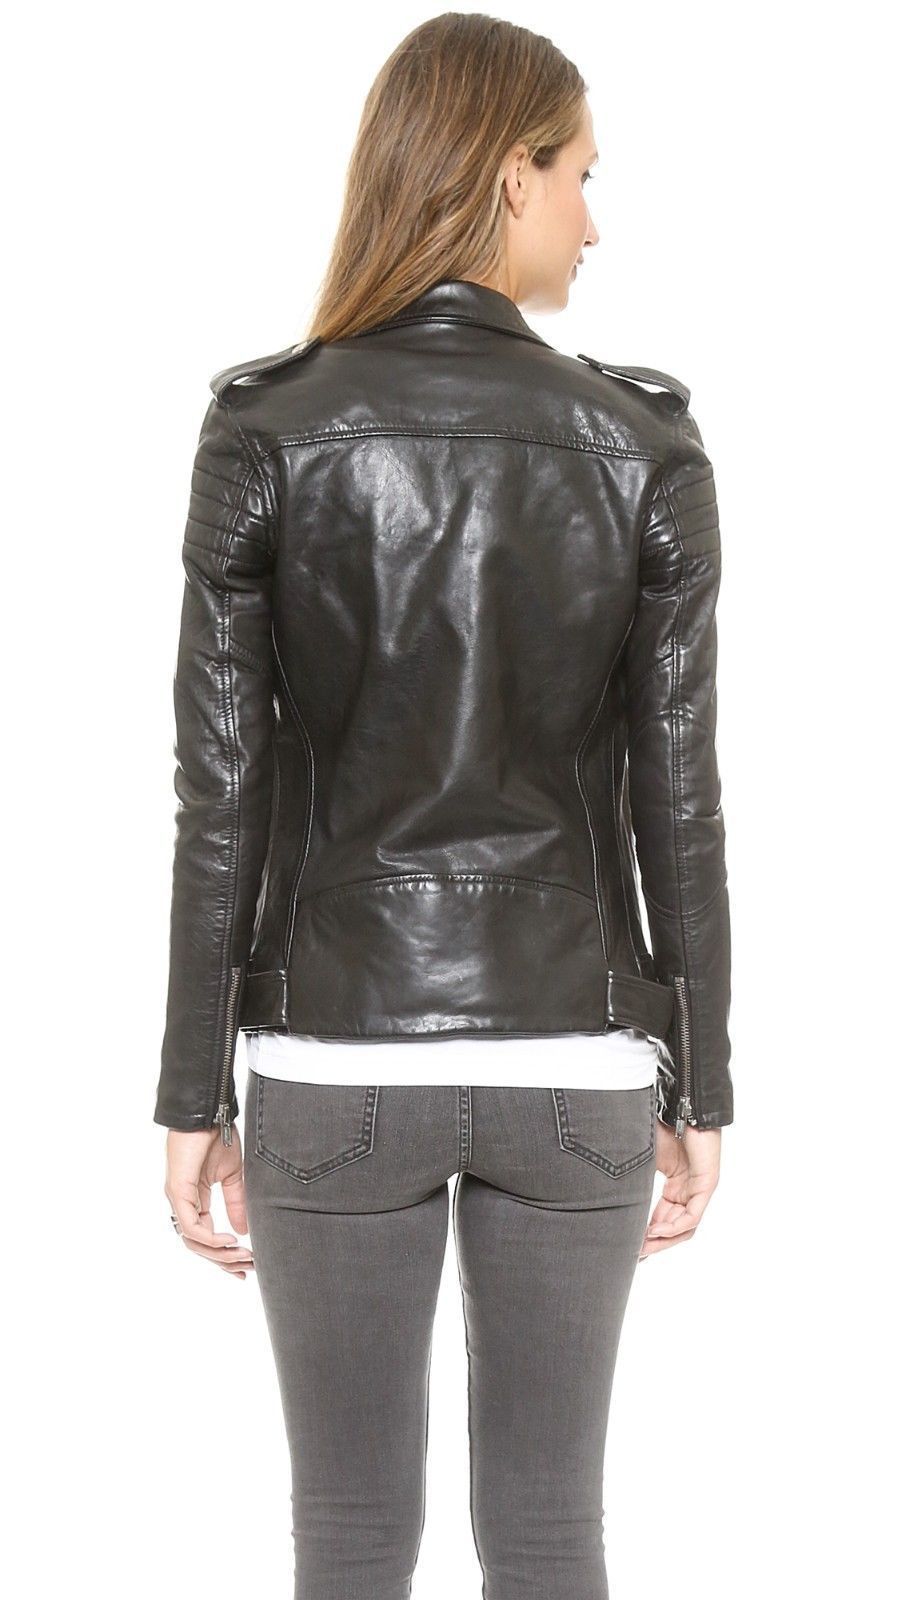 Black Women's Slim Fit Biker Style Real Leather Jacket High Quality